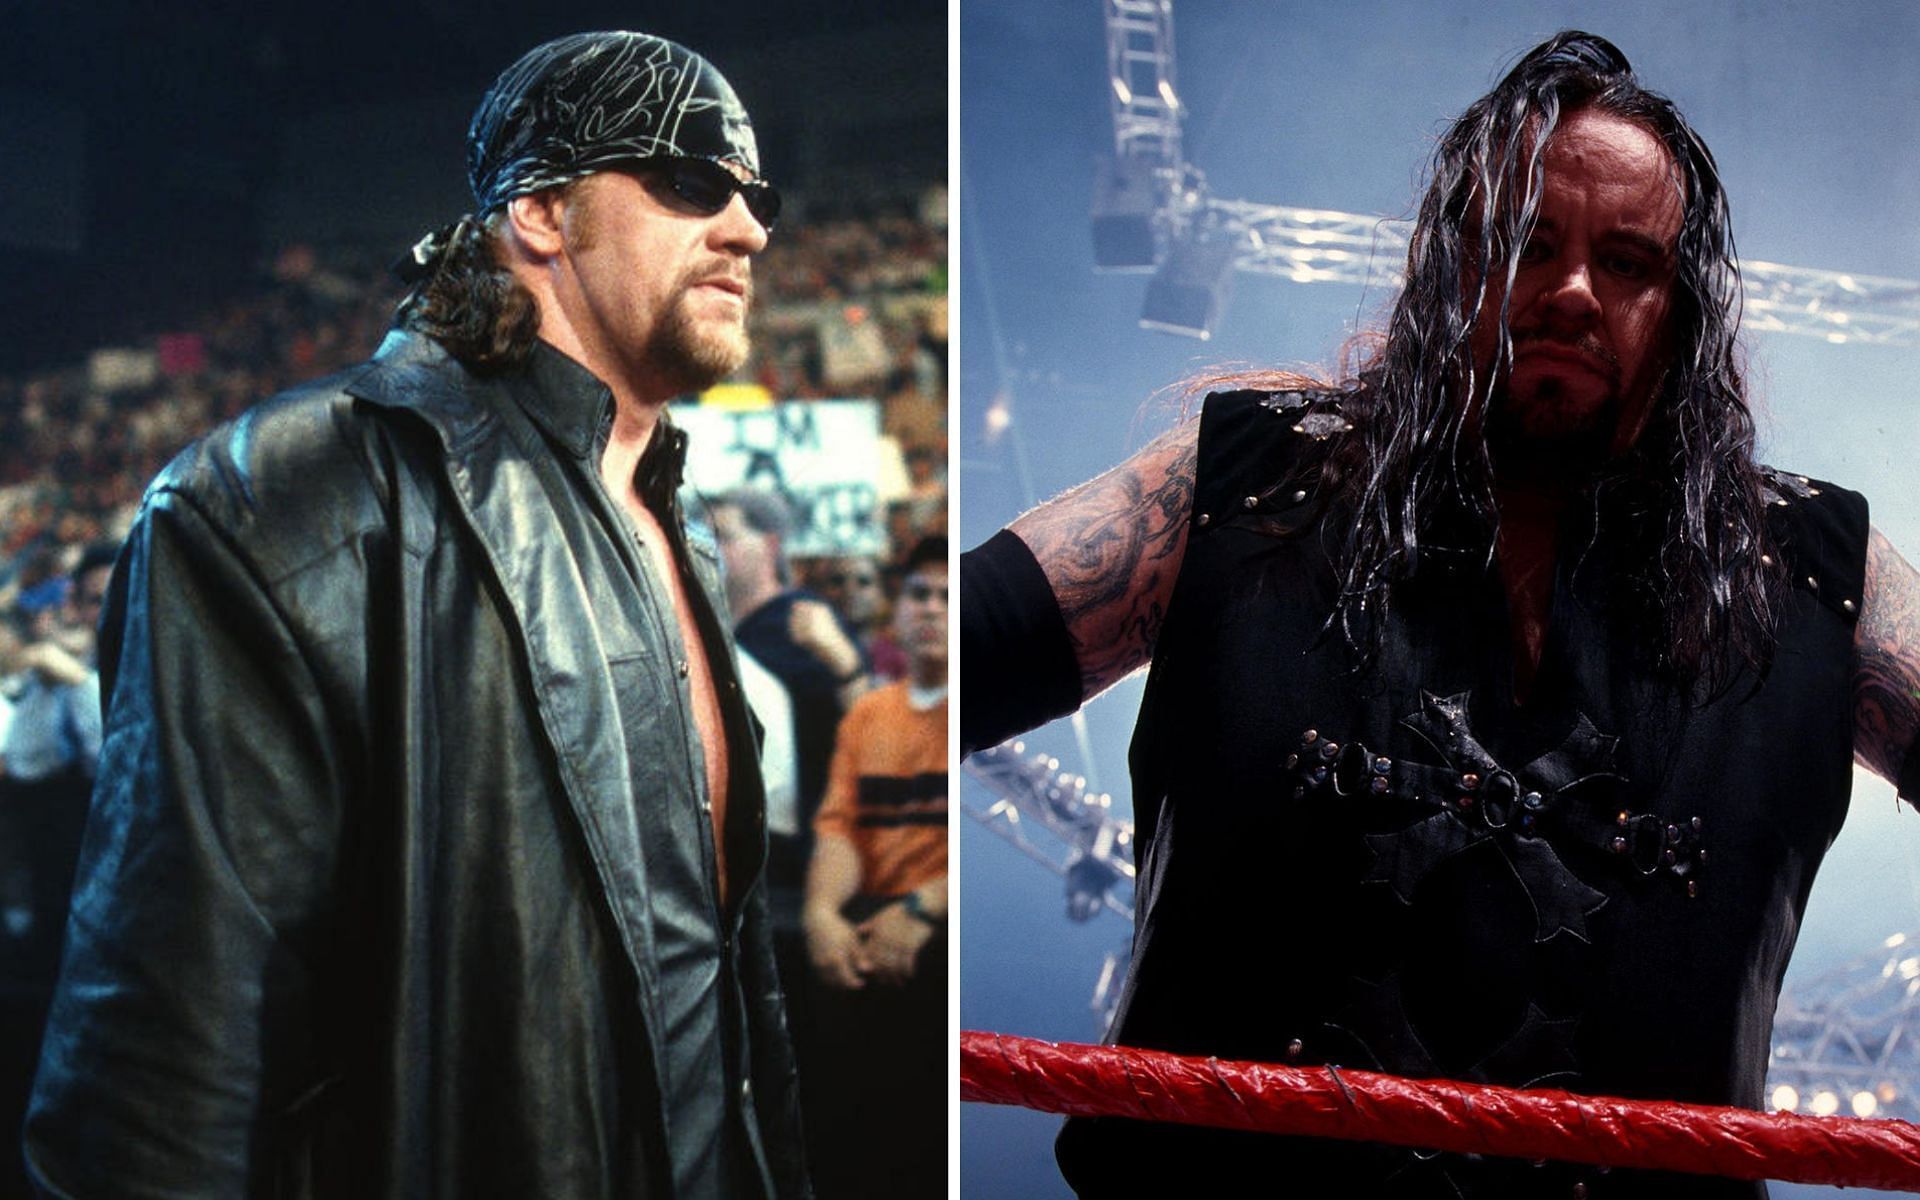 The Undertaker entered the 2022 WWE Hall of Fame!